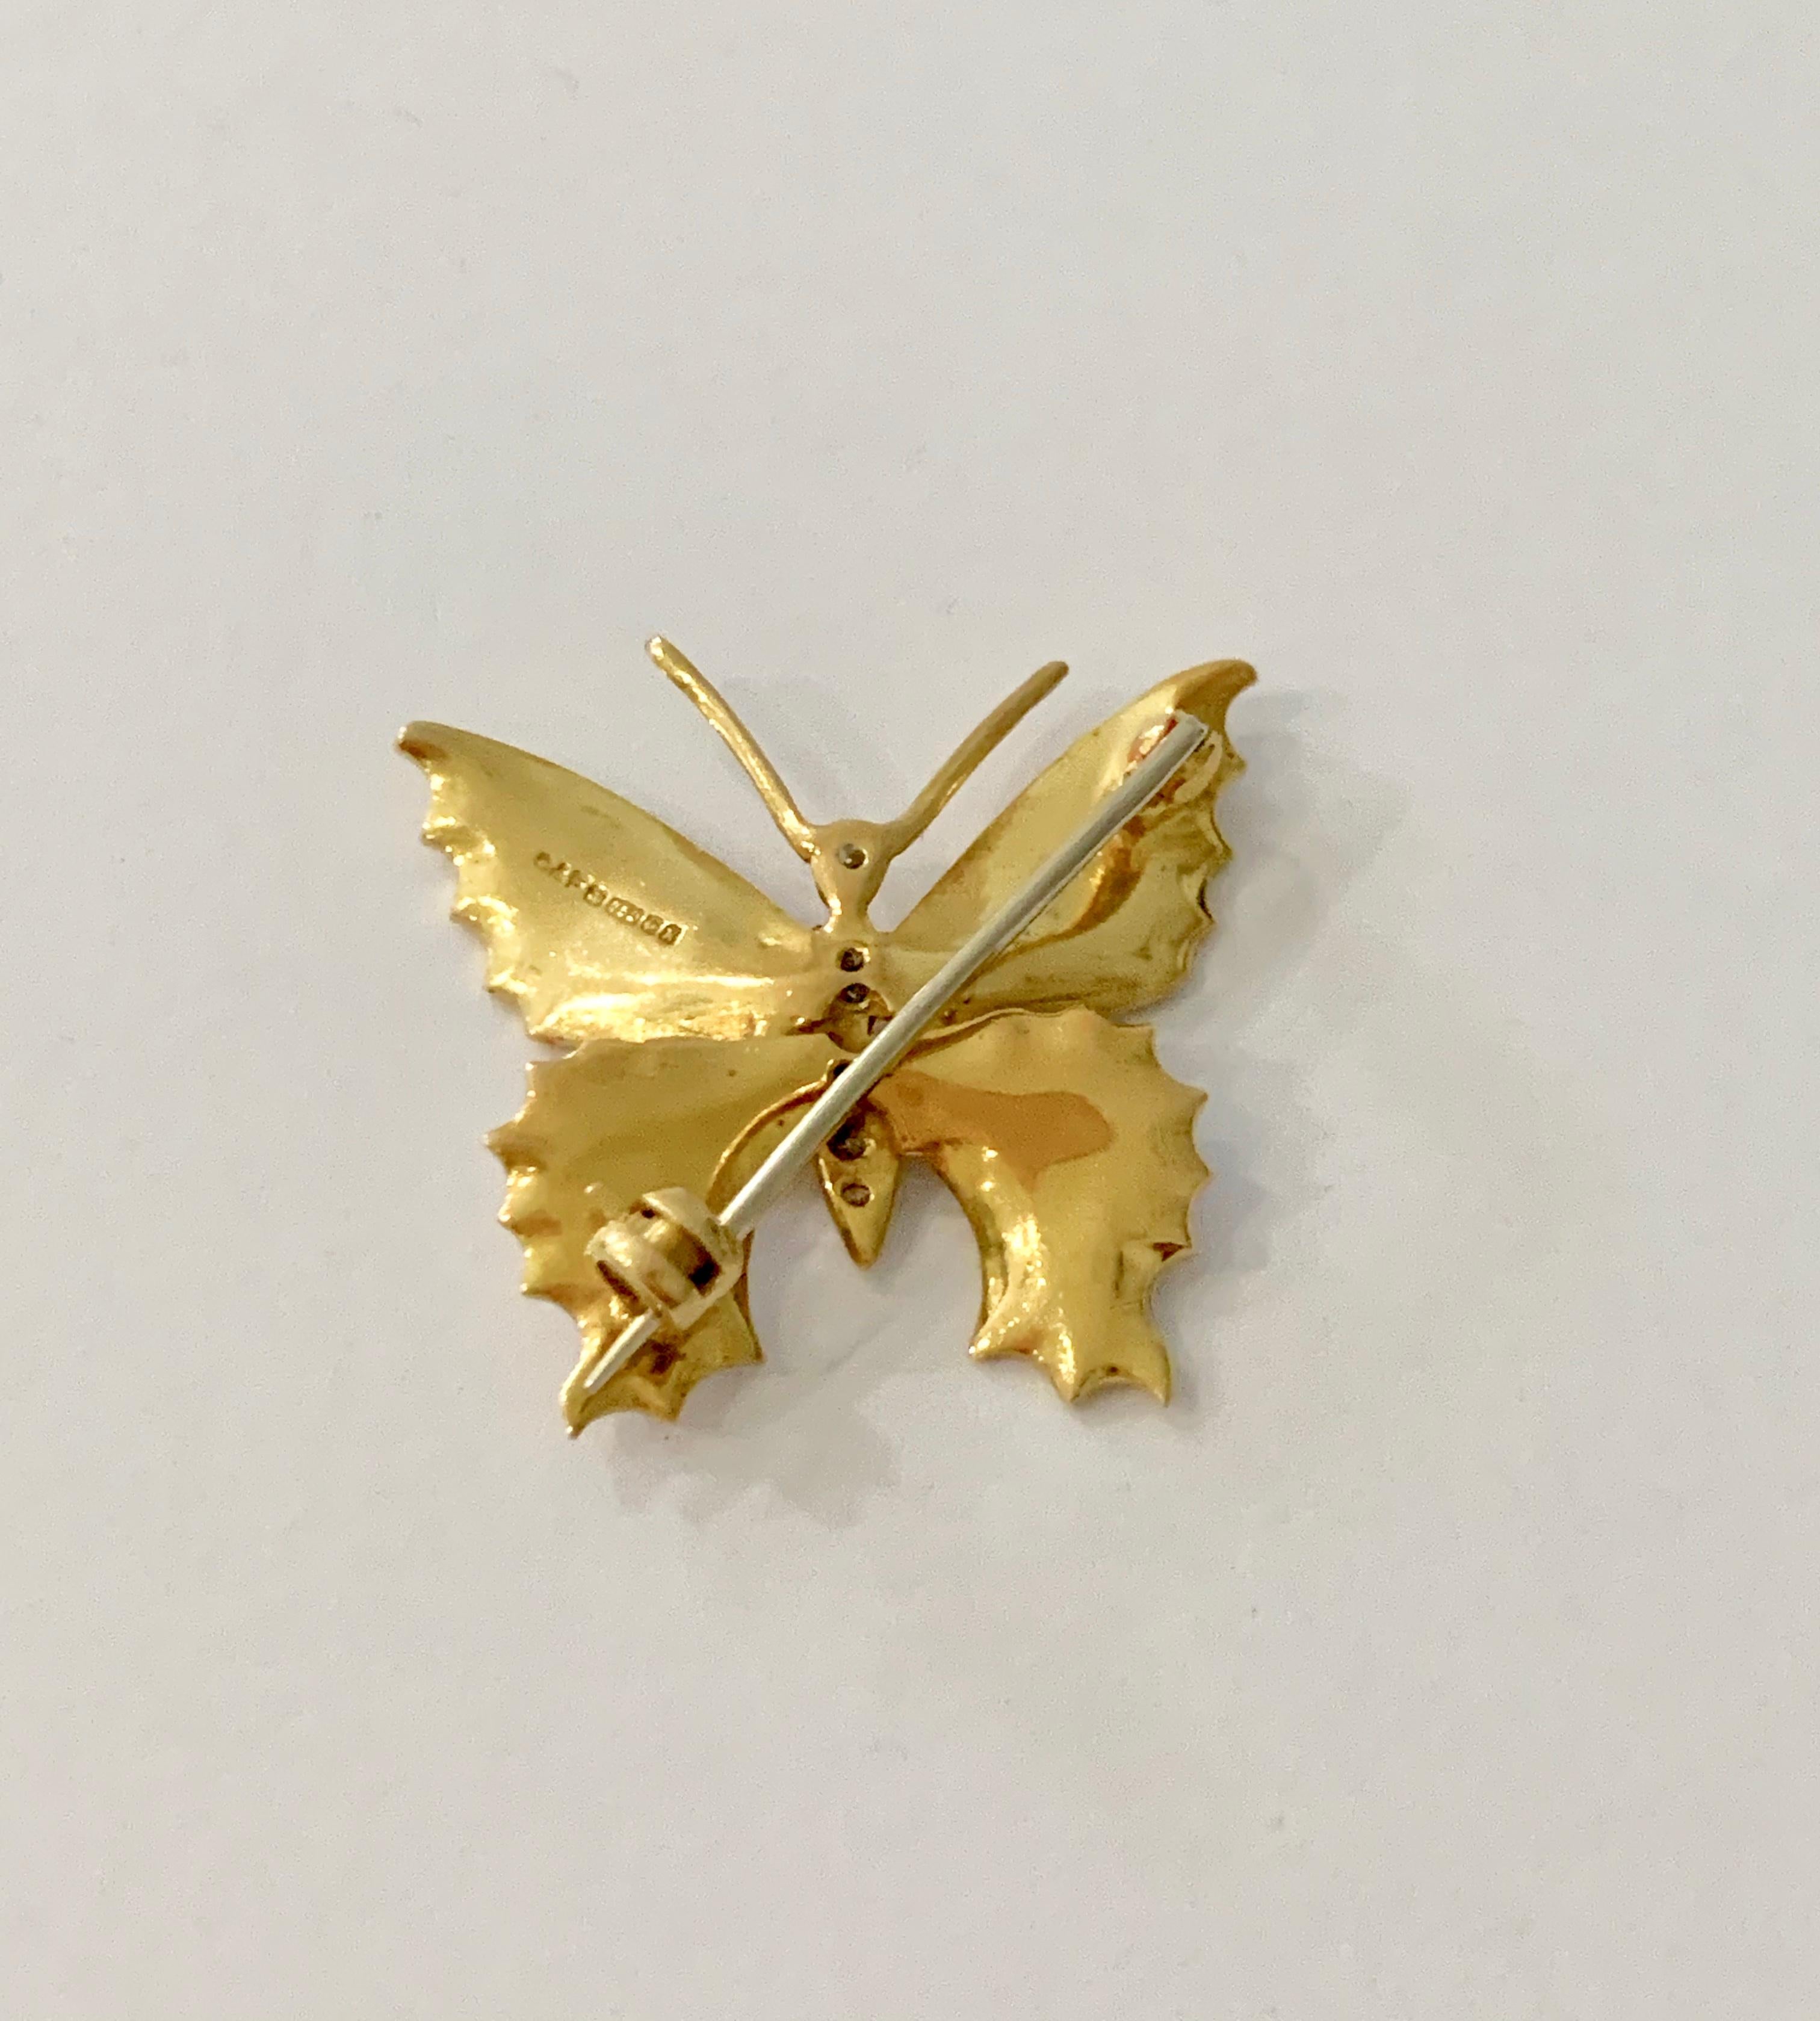 This is such a pretty and delicate gold and white enamel brooch, it would look elegant worn by anyone of any age.   The brooch is made of 18ct Yellow Gold and has off white enamel set on all four wings.  The body of the butterfly is set with 6 round